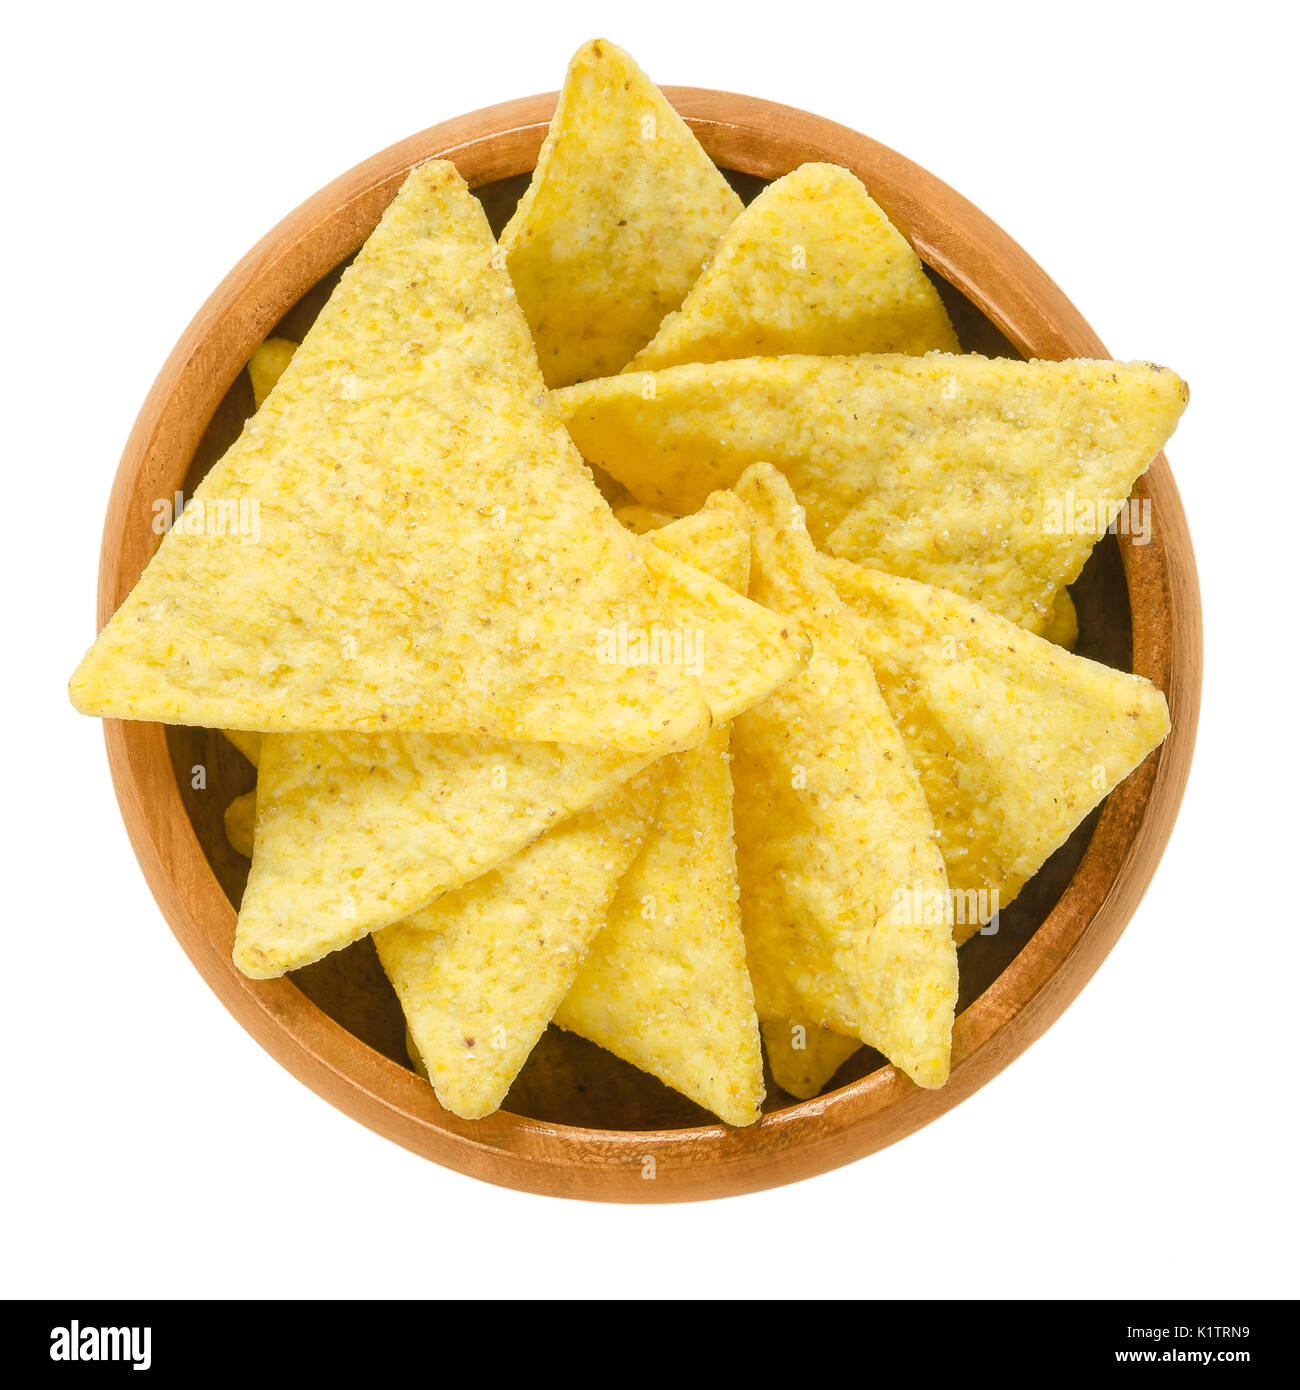 Tortilla chips in wooden bowl. Snack food made from corn tortillas or corn masa, cut into triangle shaped wedges, fried in oil and salted. Stock Photo